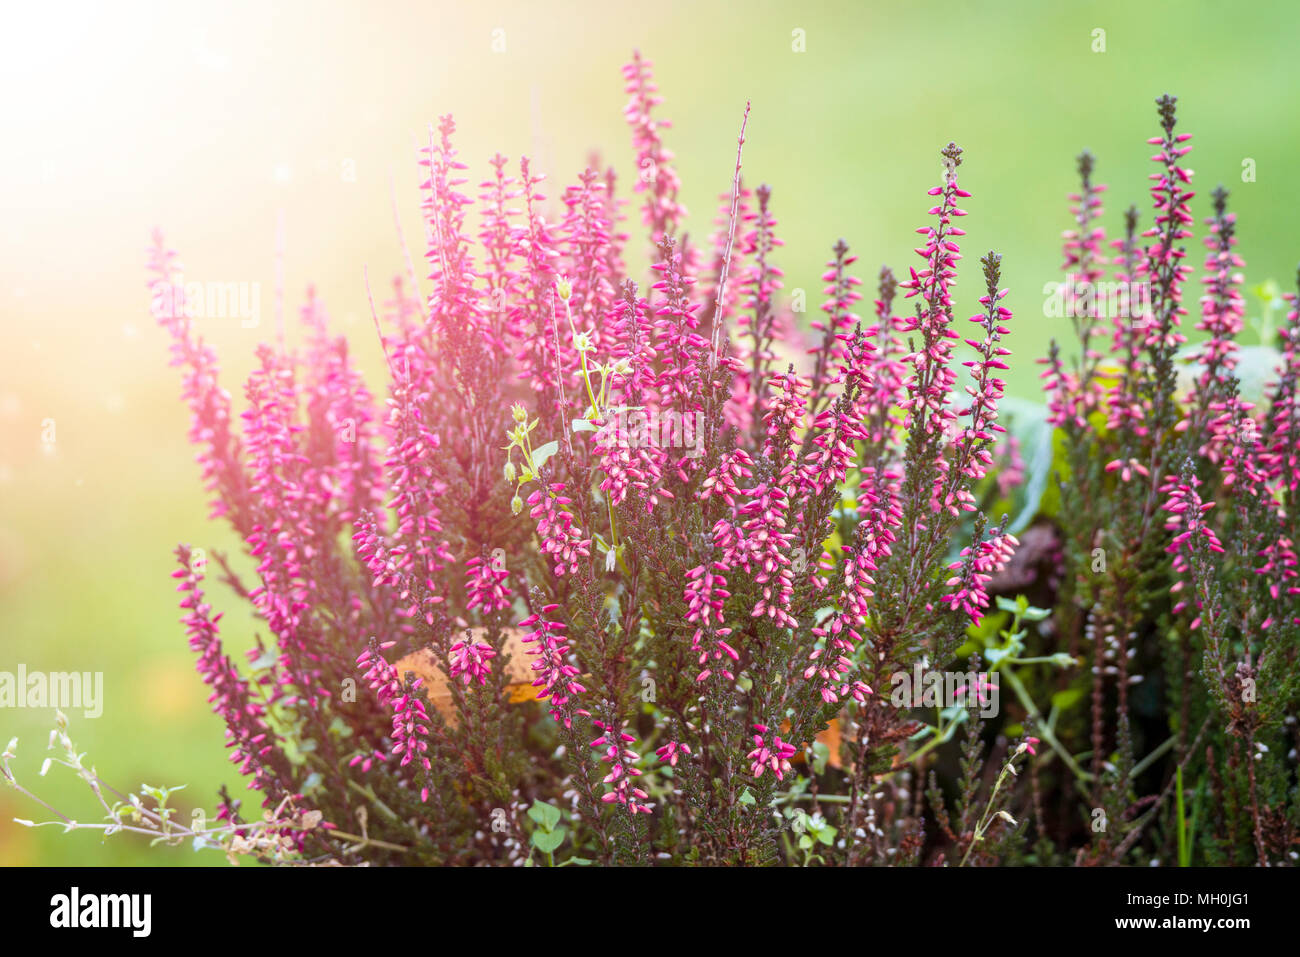 Erica plant with beautiful violet colors on a green background Stock Photo